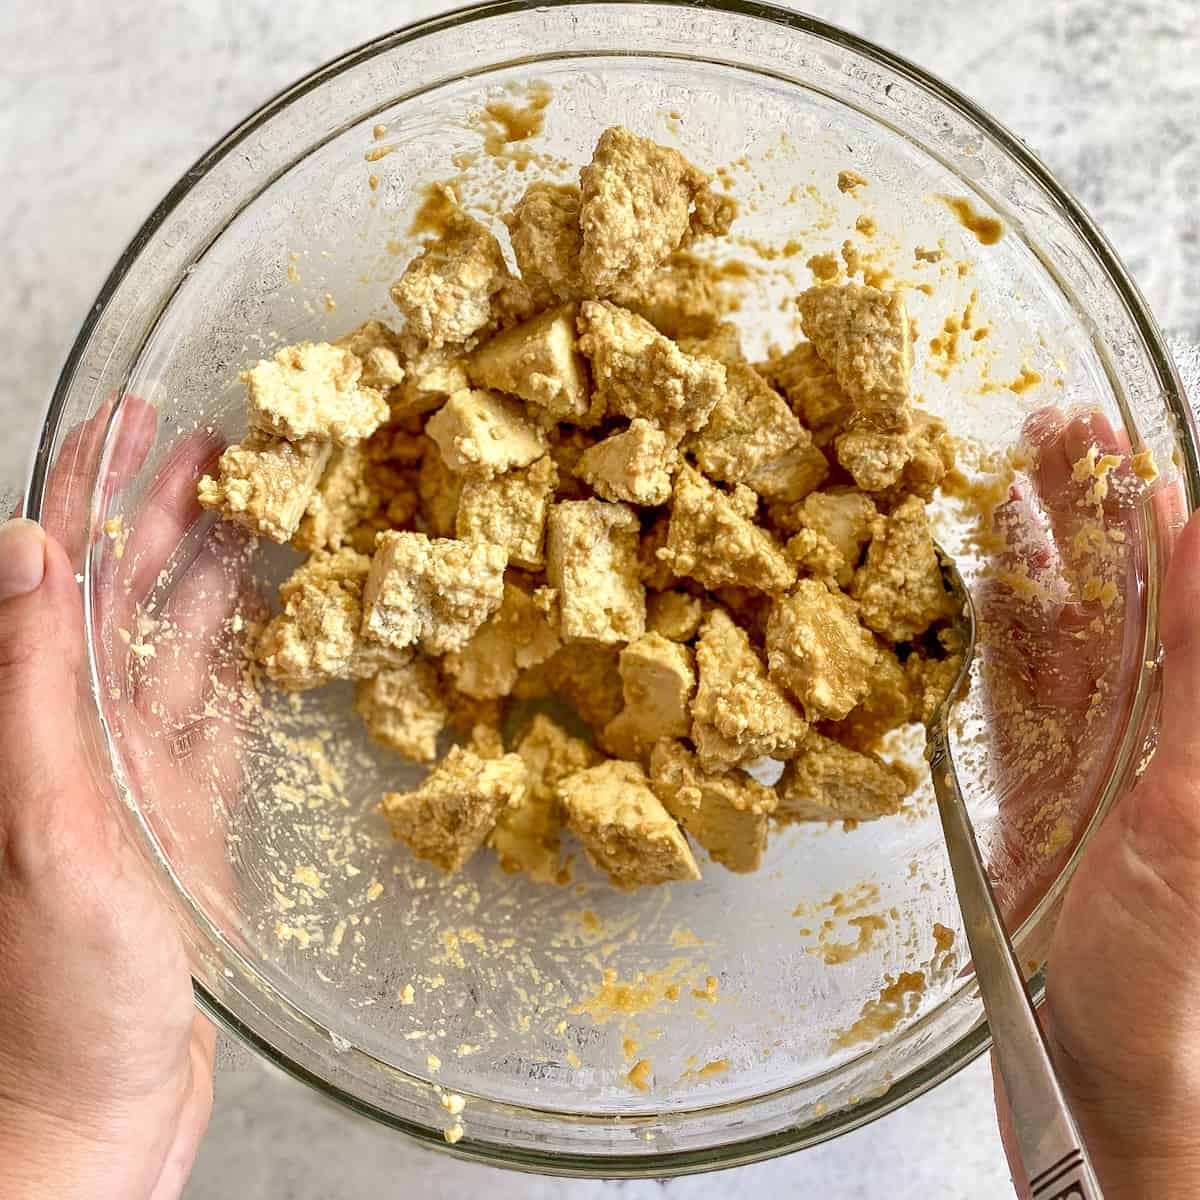 Tofu chunks mixed with paste in a bowl.